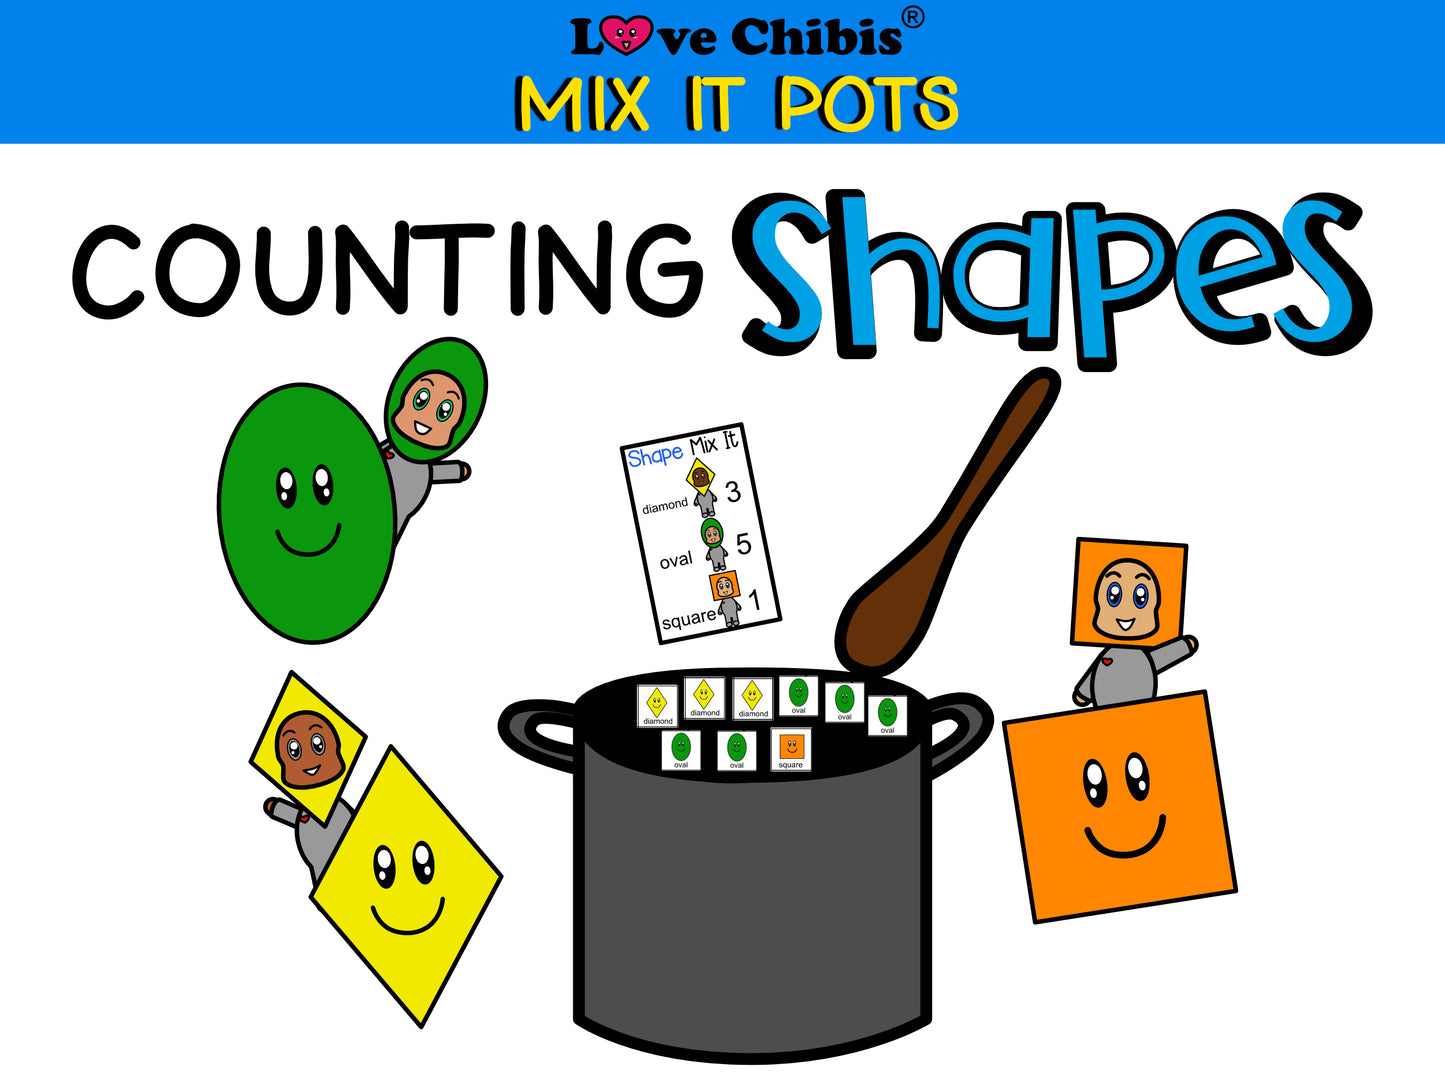 Love Chibis Counting Shapes Mix It Pots product